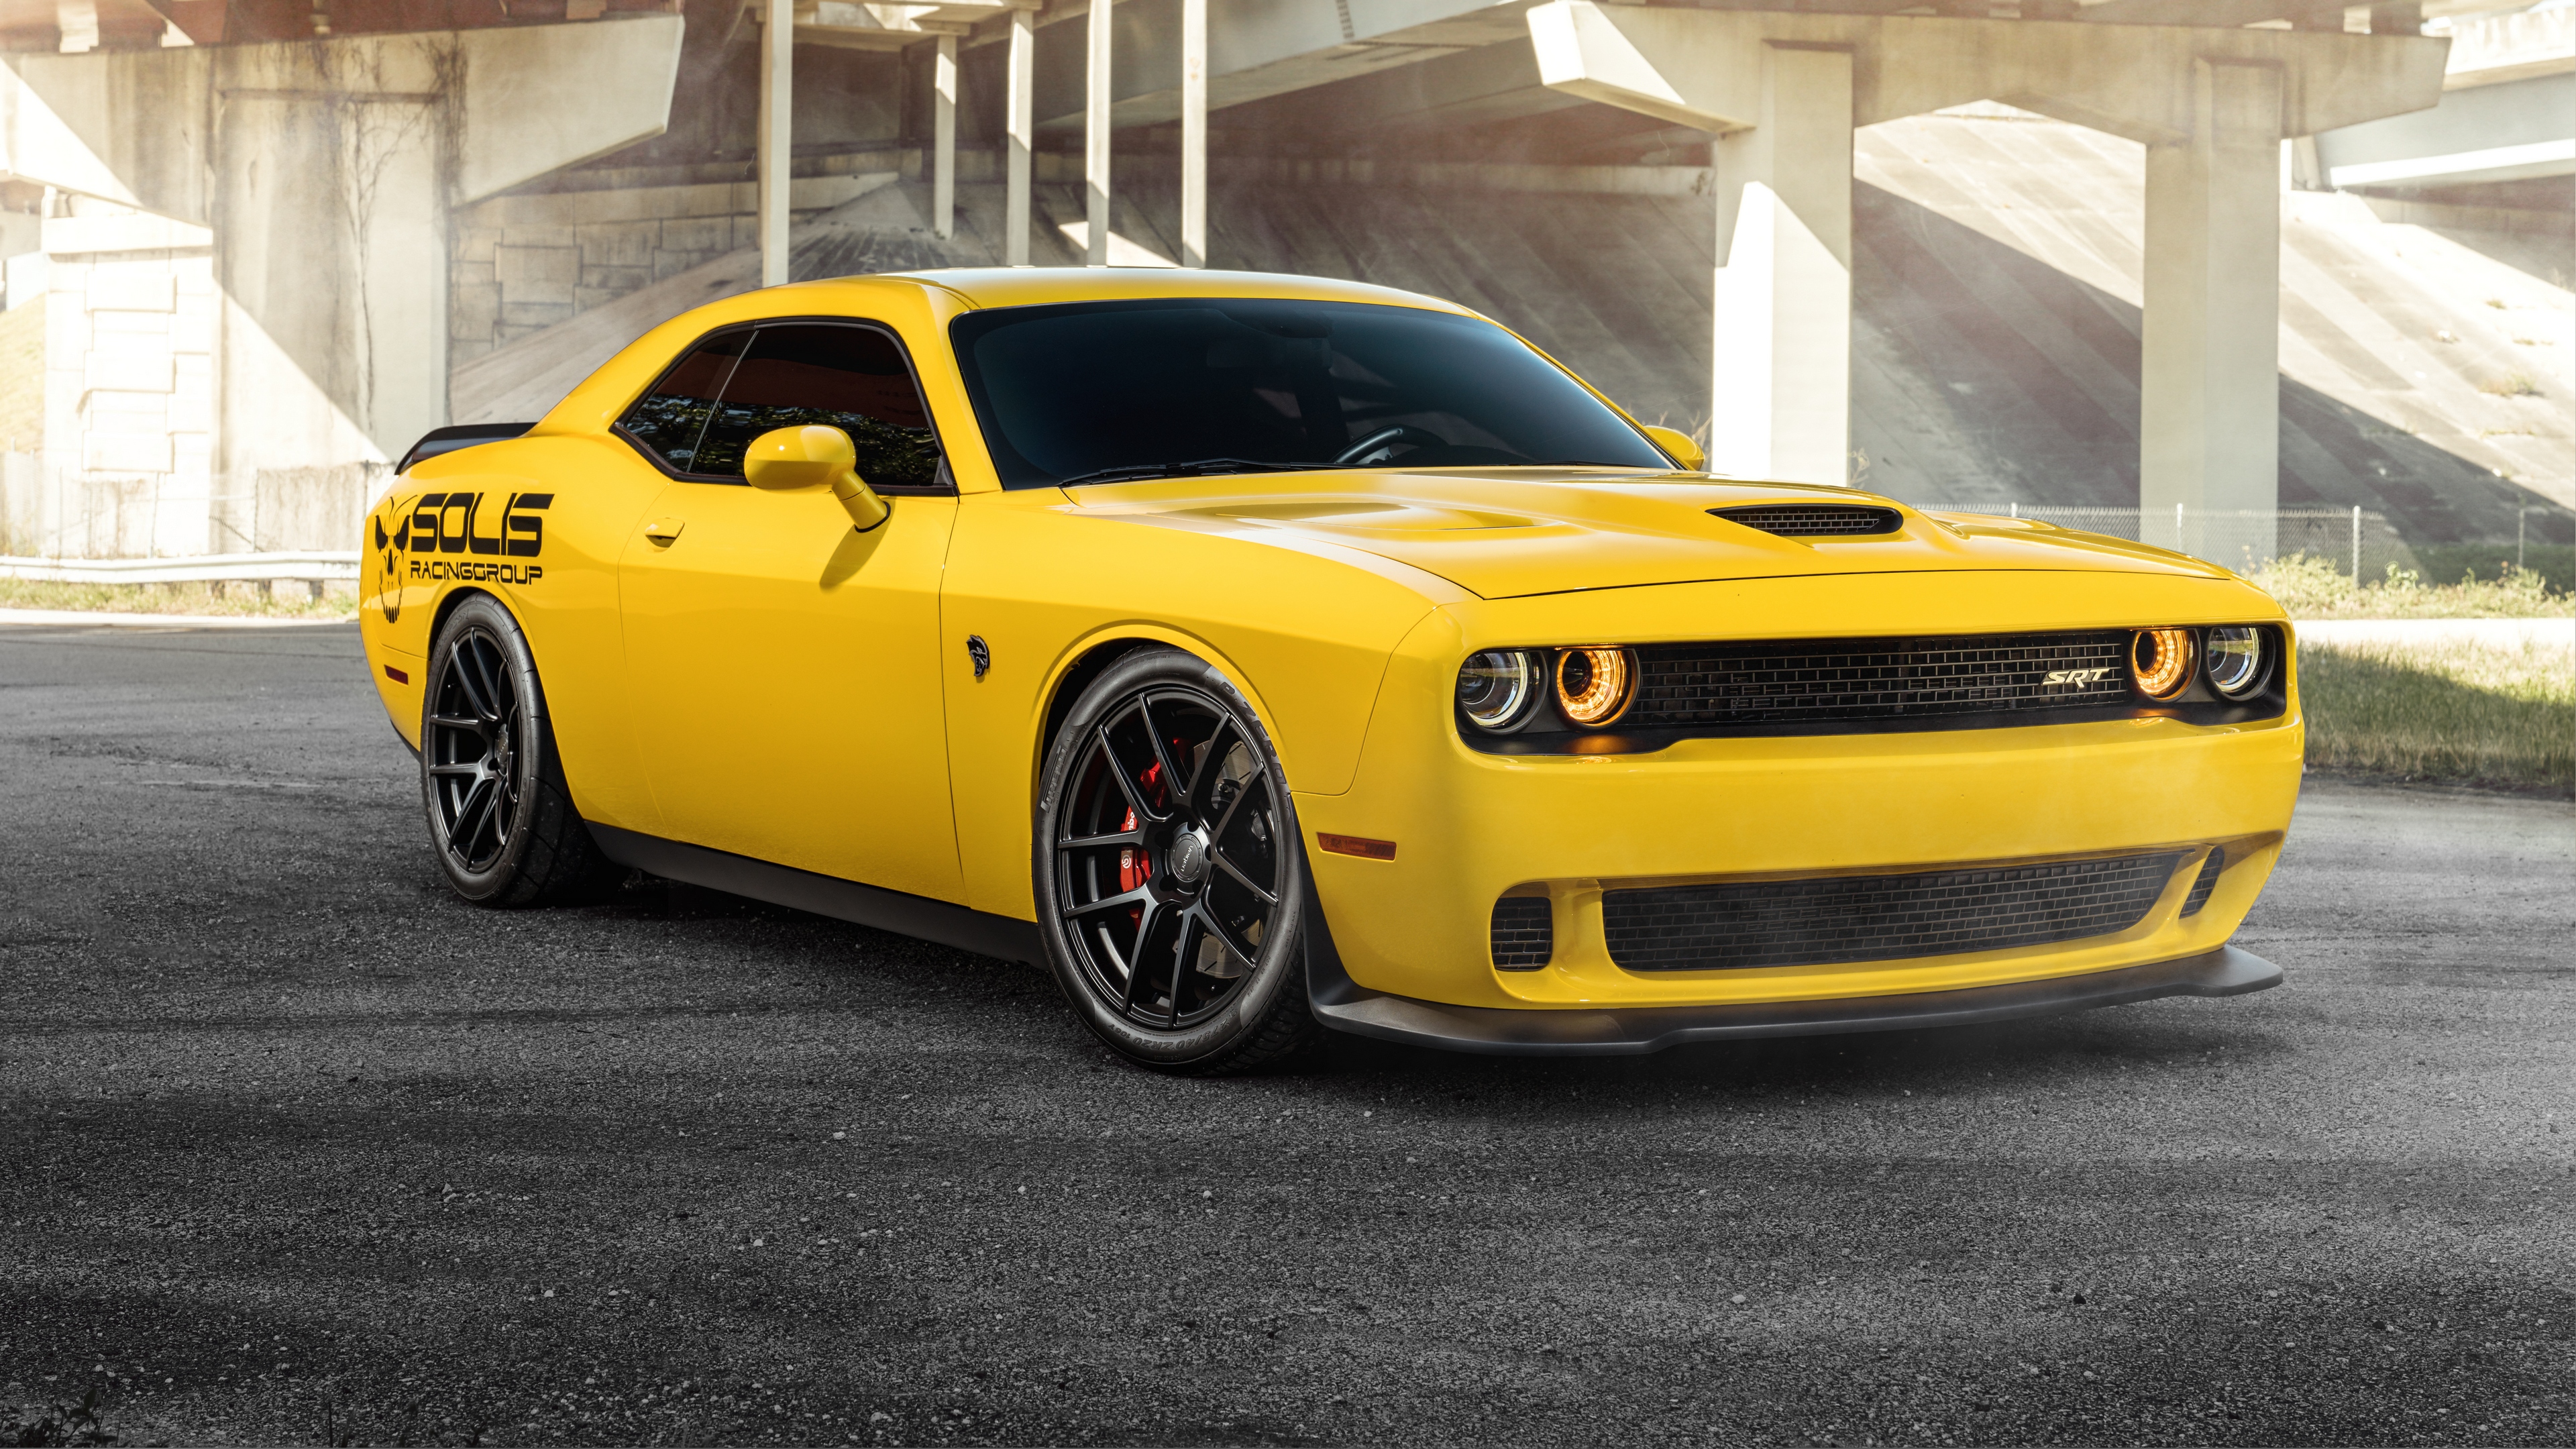 Dodge Challenger Dodge Vehicle Muscle Cars Car Yellow Cars 3840x2160